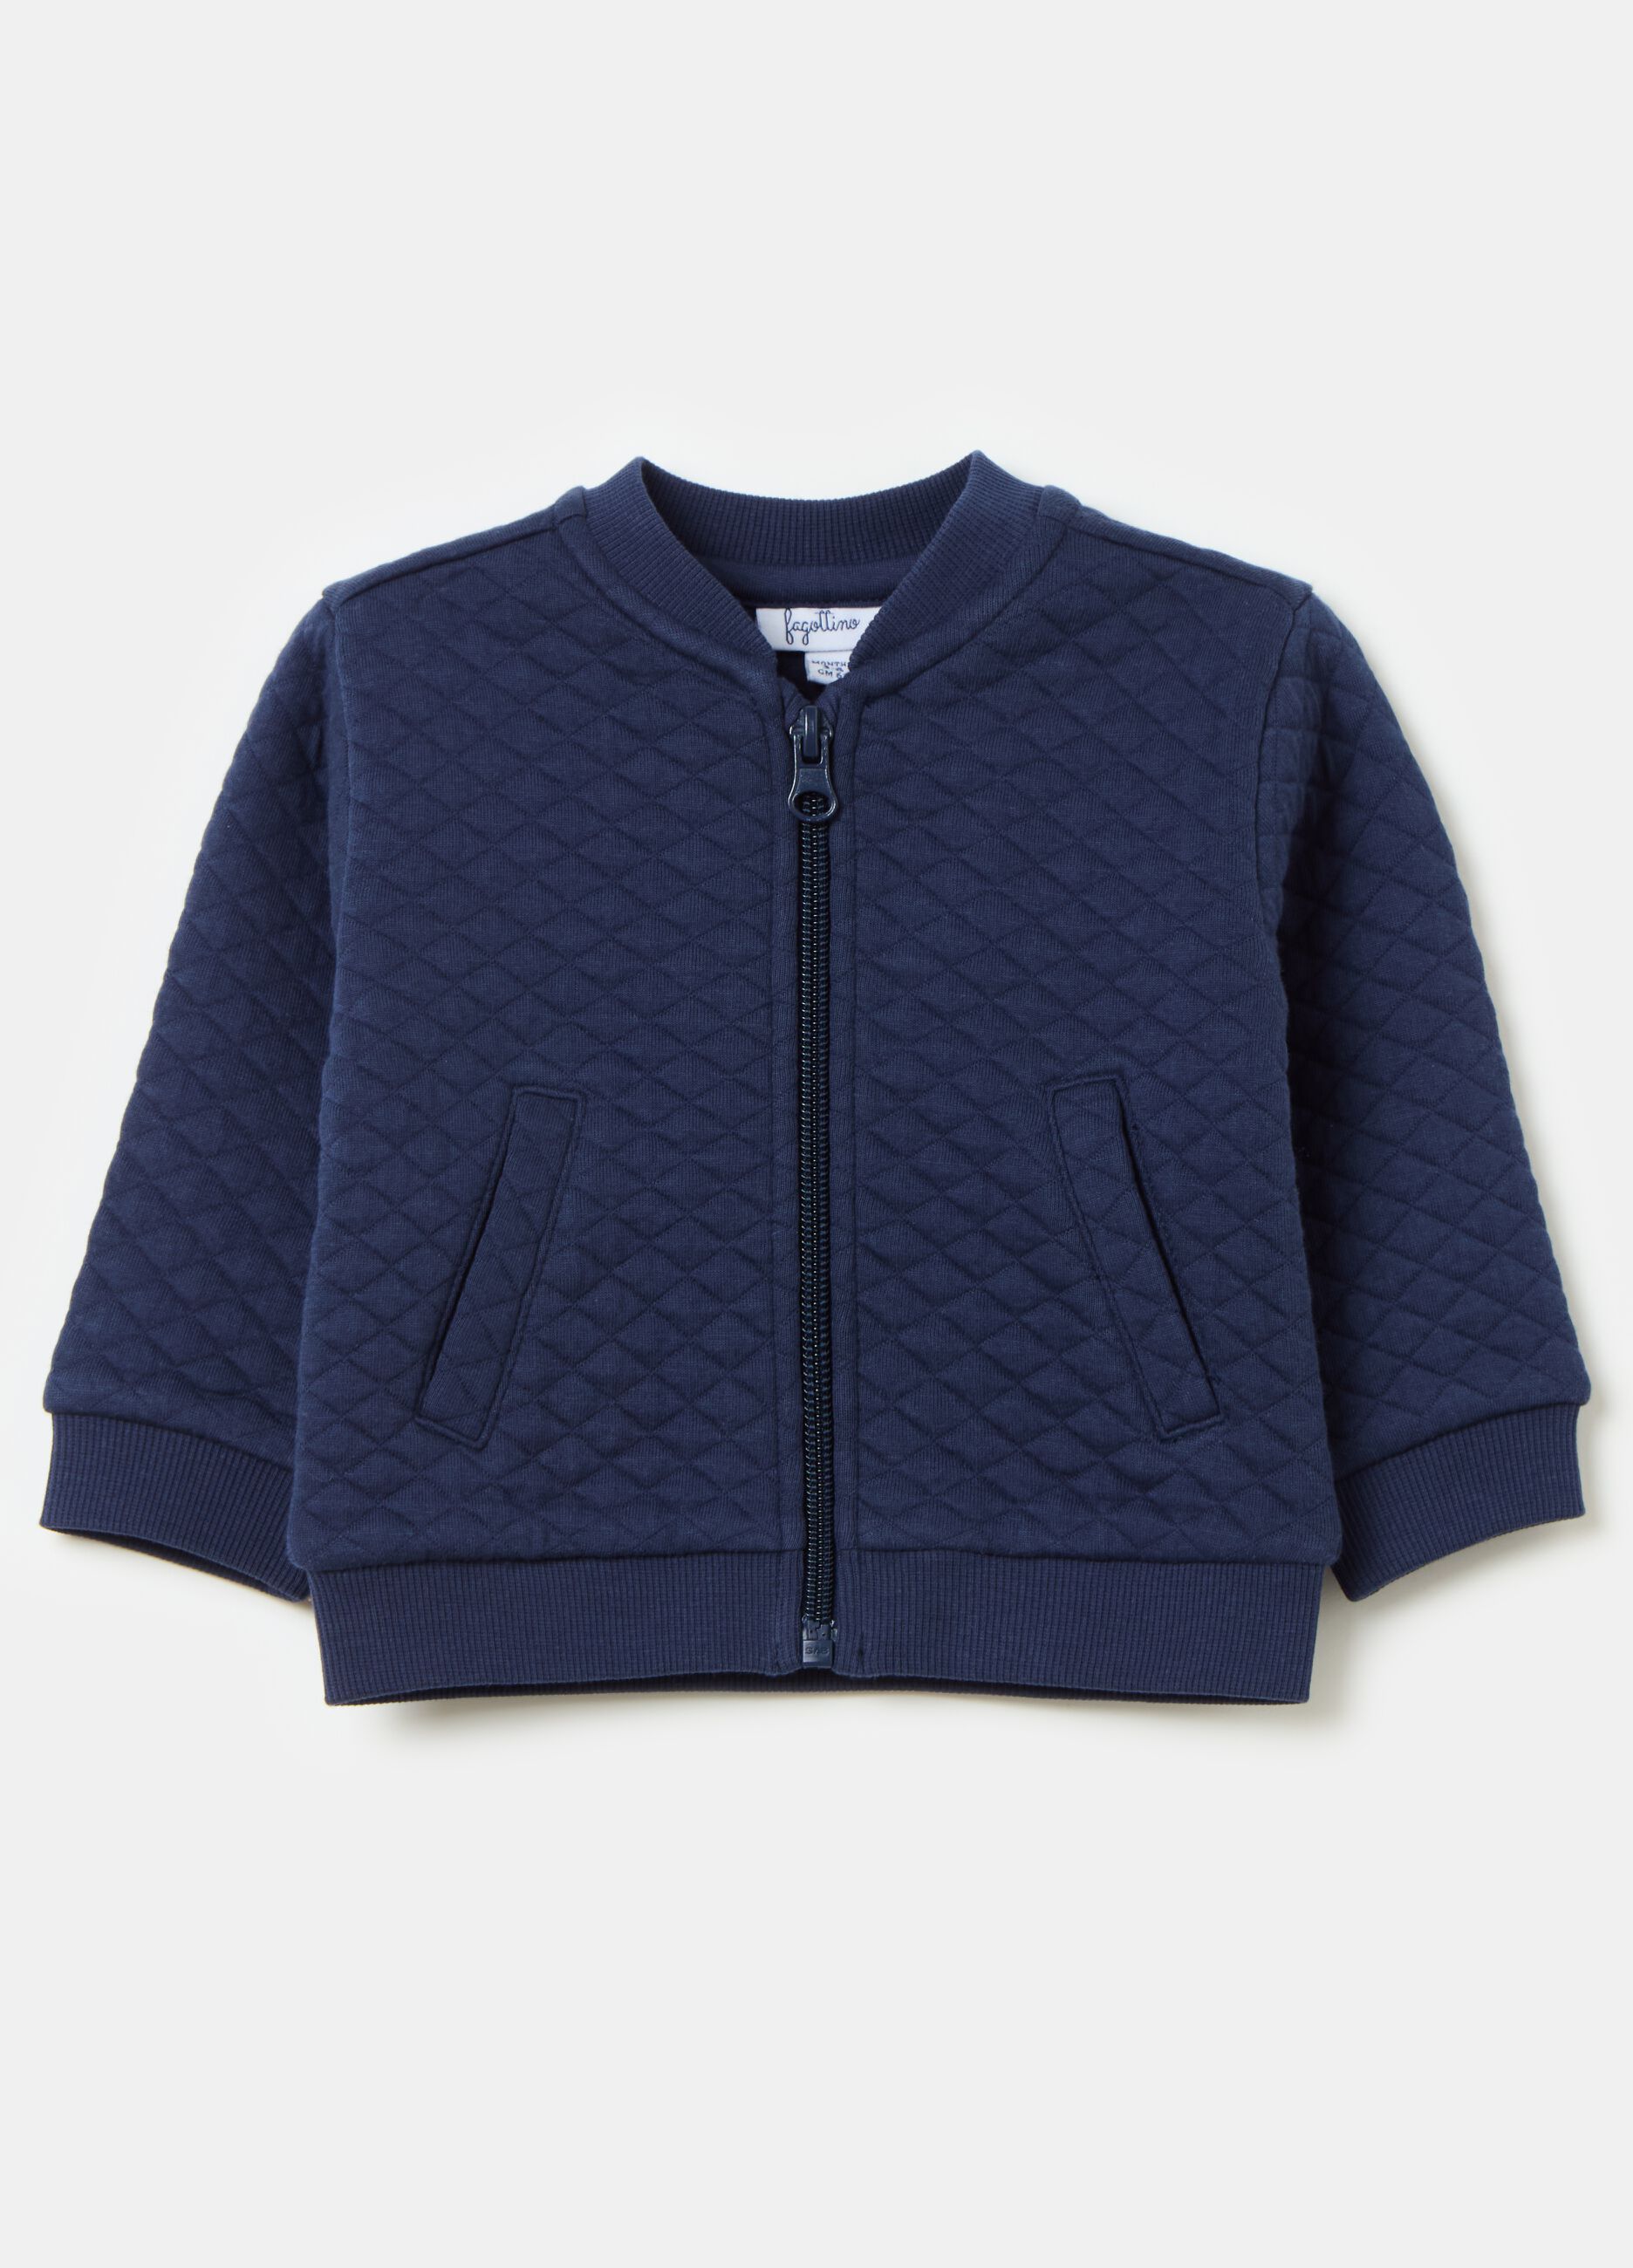 Full-zip sweatshirt with diamond quilting and pockets